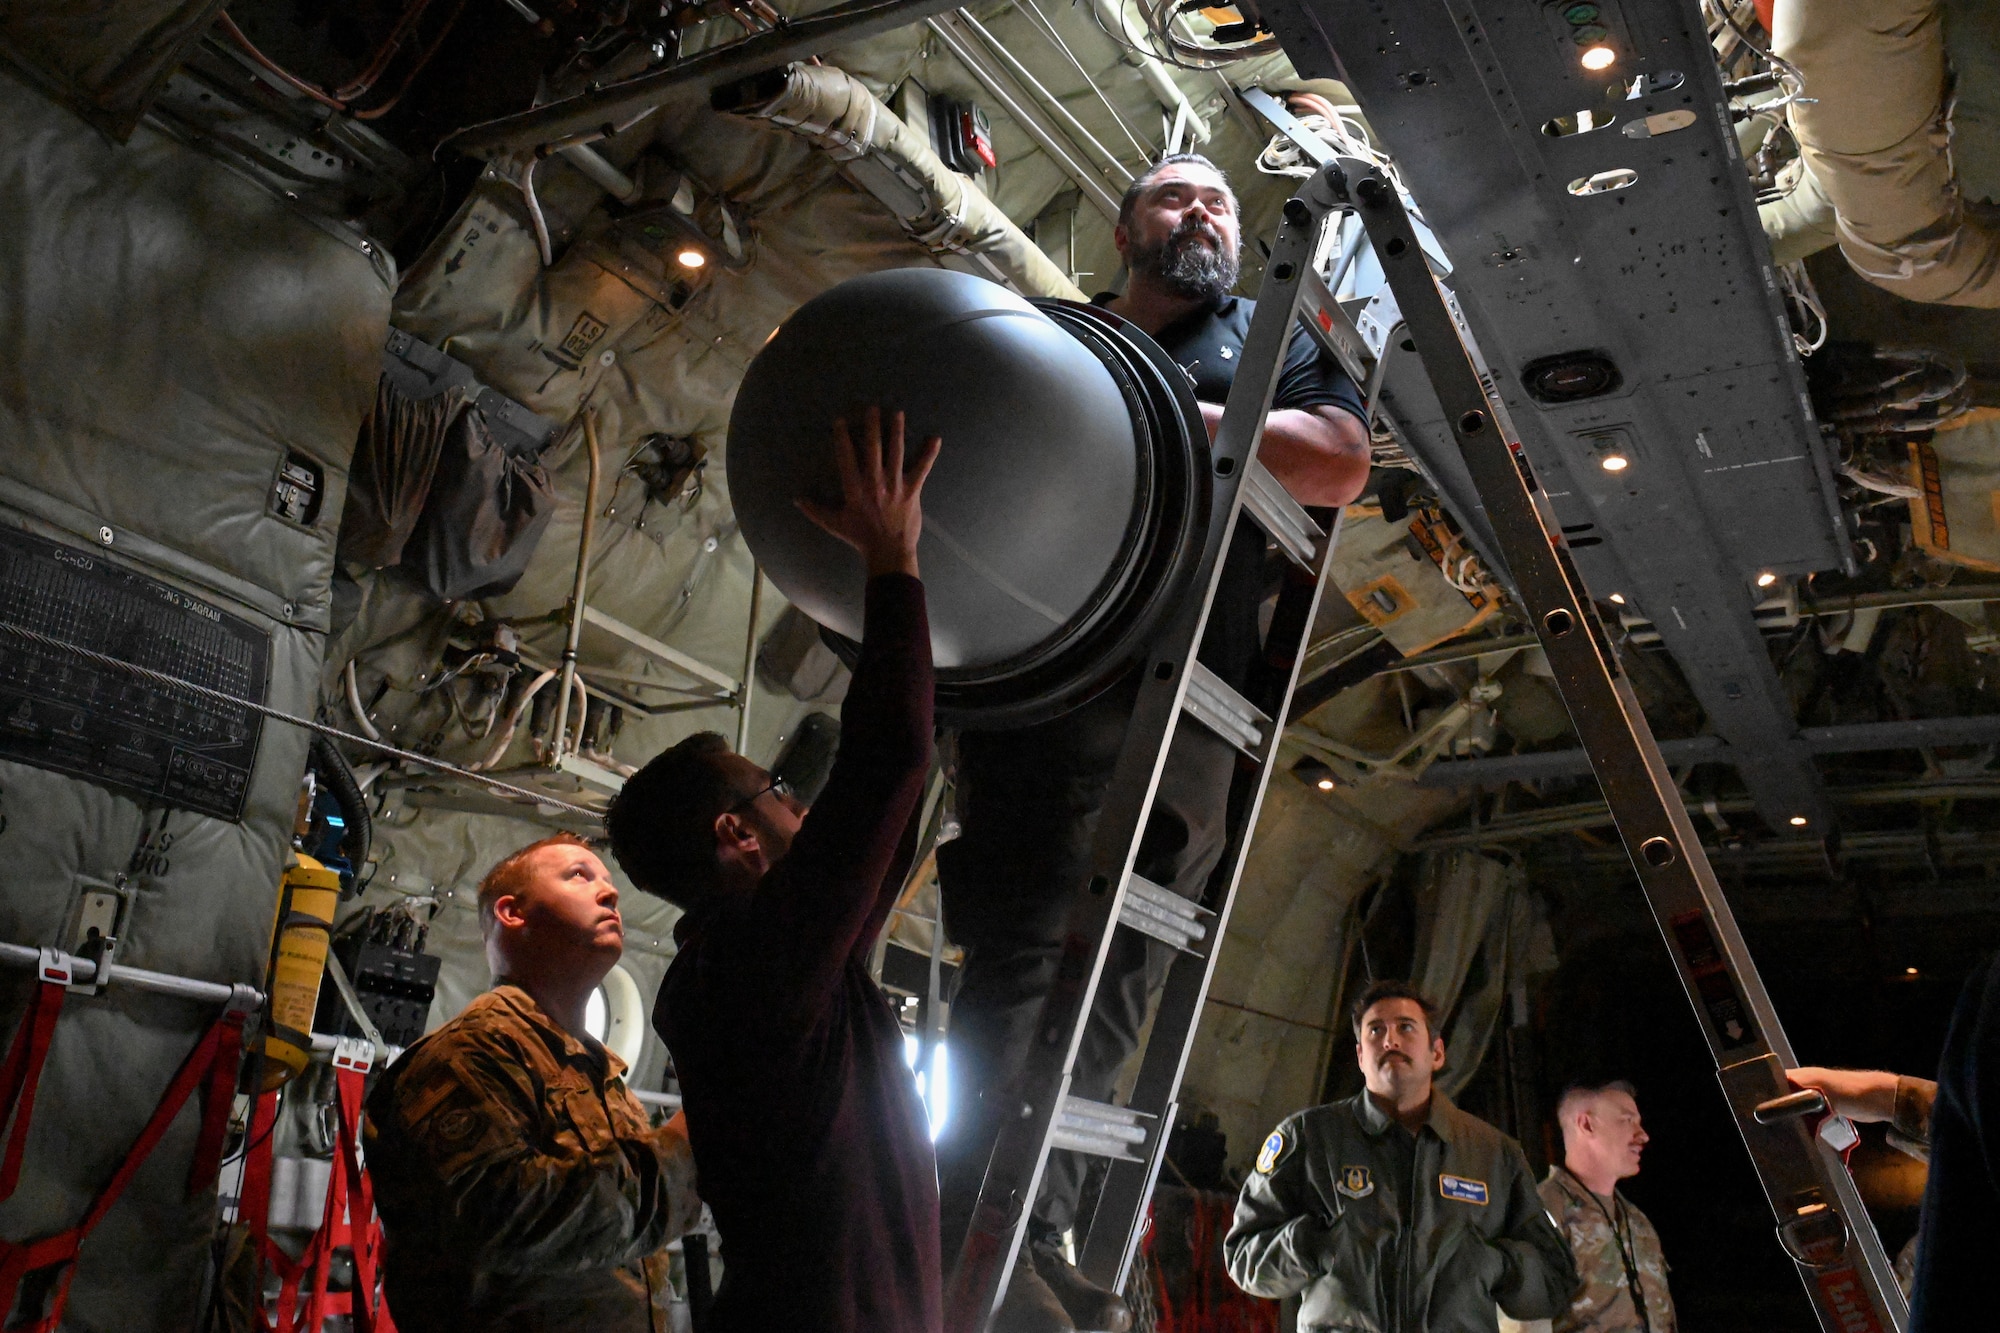 A man hoists a communications pod up to another man standing on a ladder in a C-130J cargo bay. Three Airmen stand around them and watch.